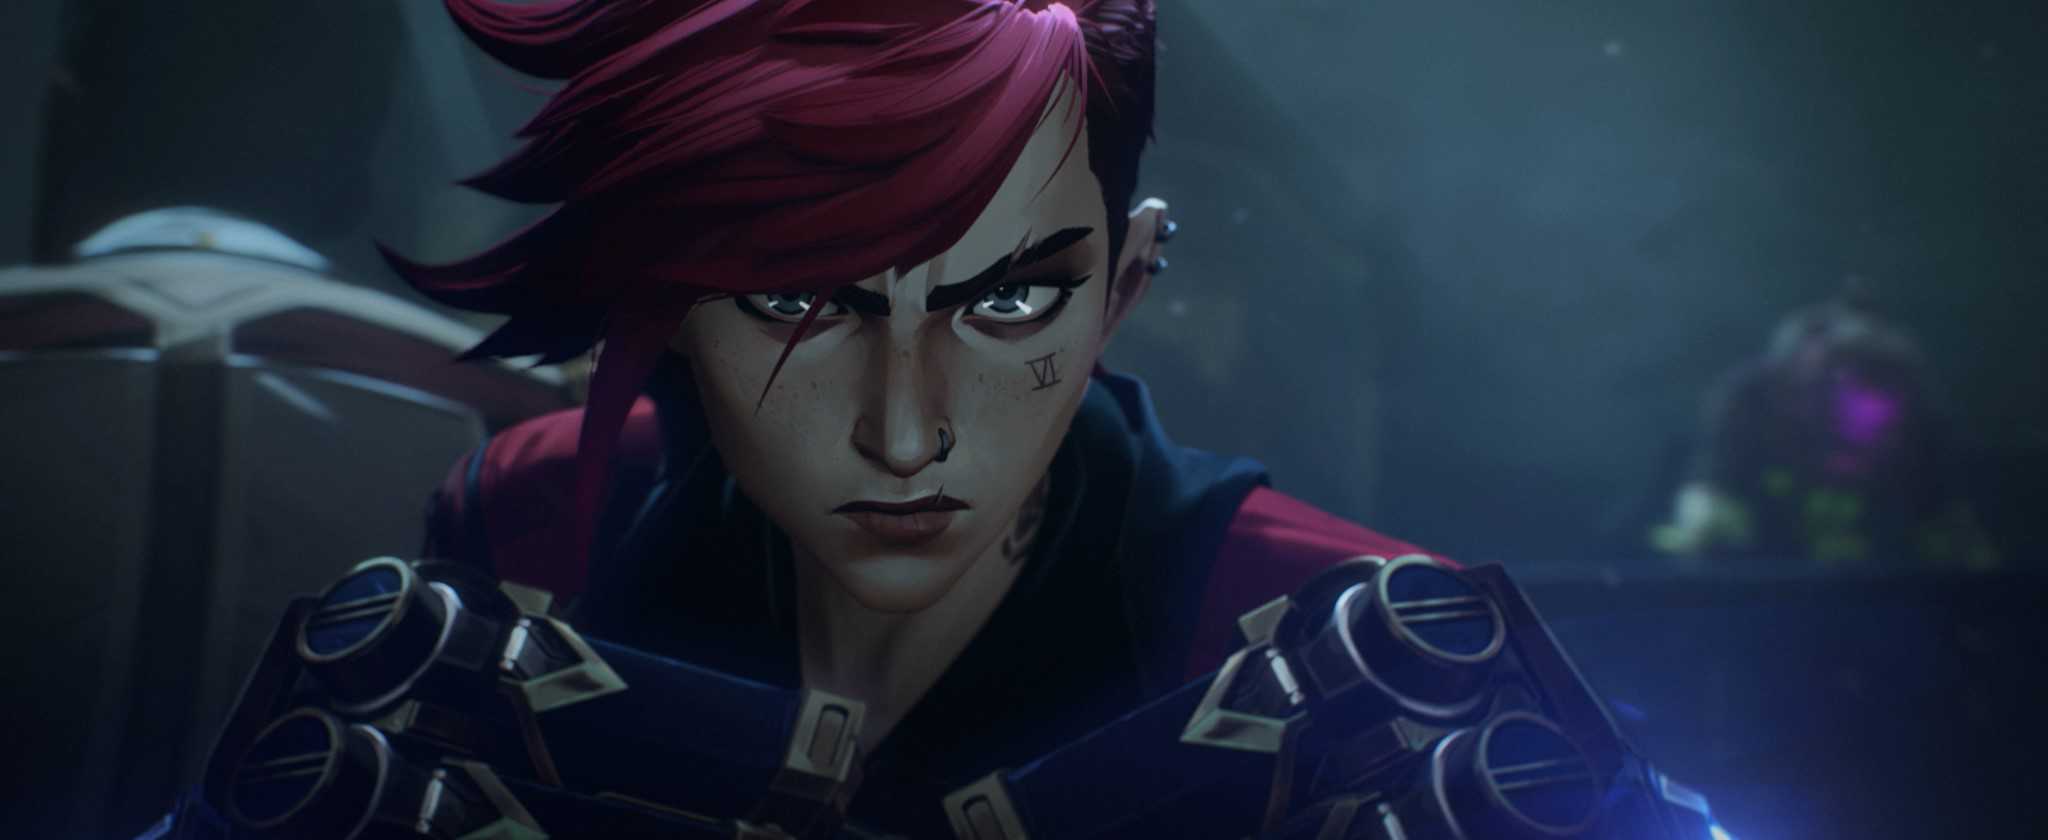 A CGI young woman with red hair holds up her fists in this image from Riot Games.